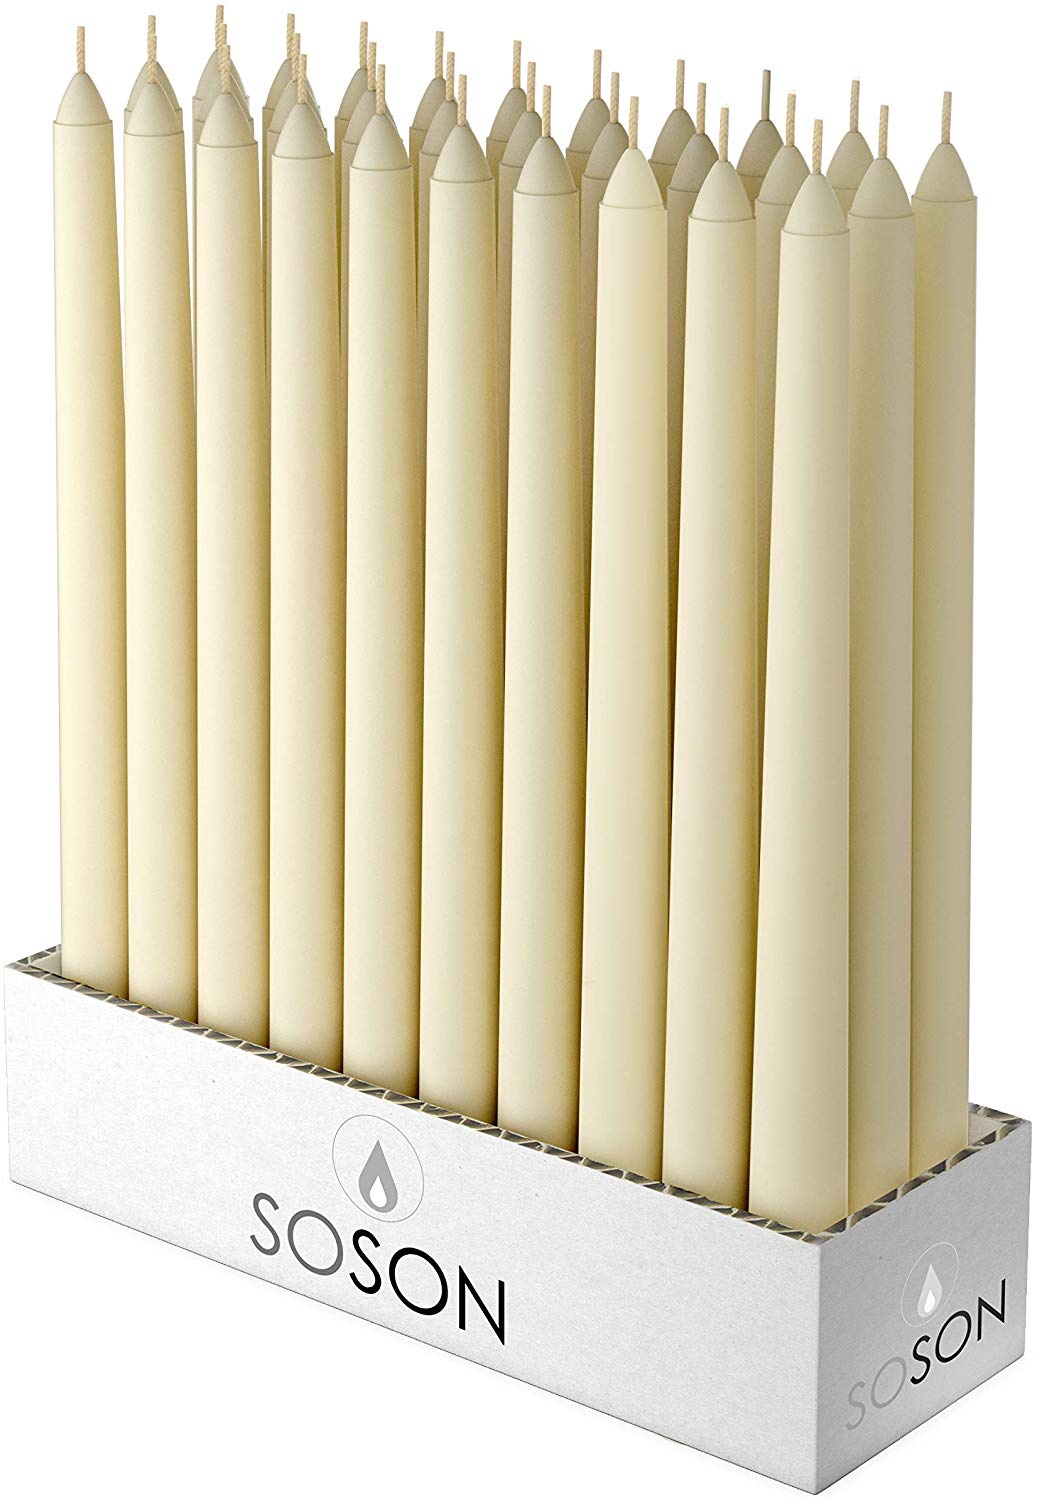 Tall Taper Candles